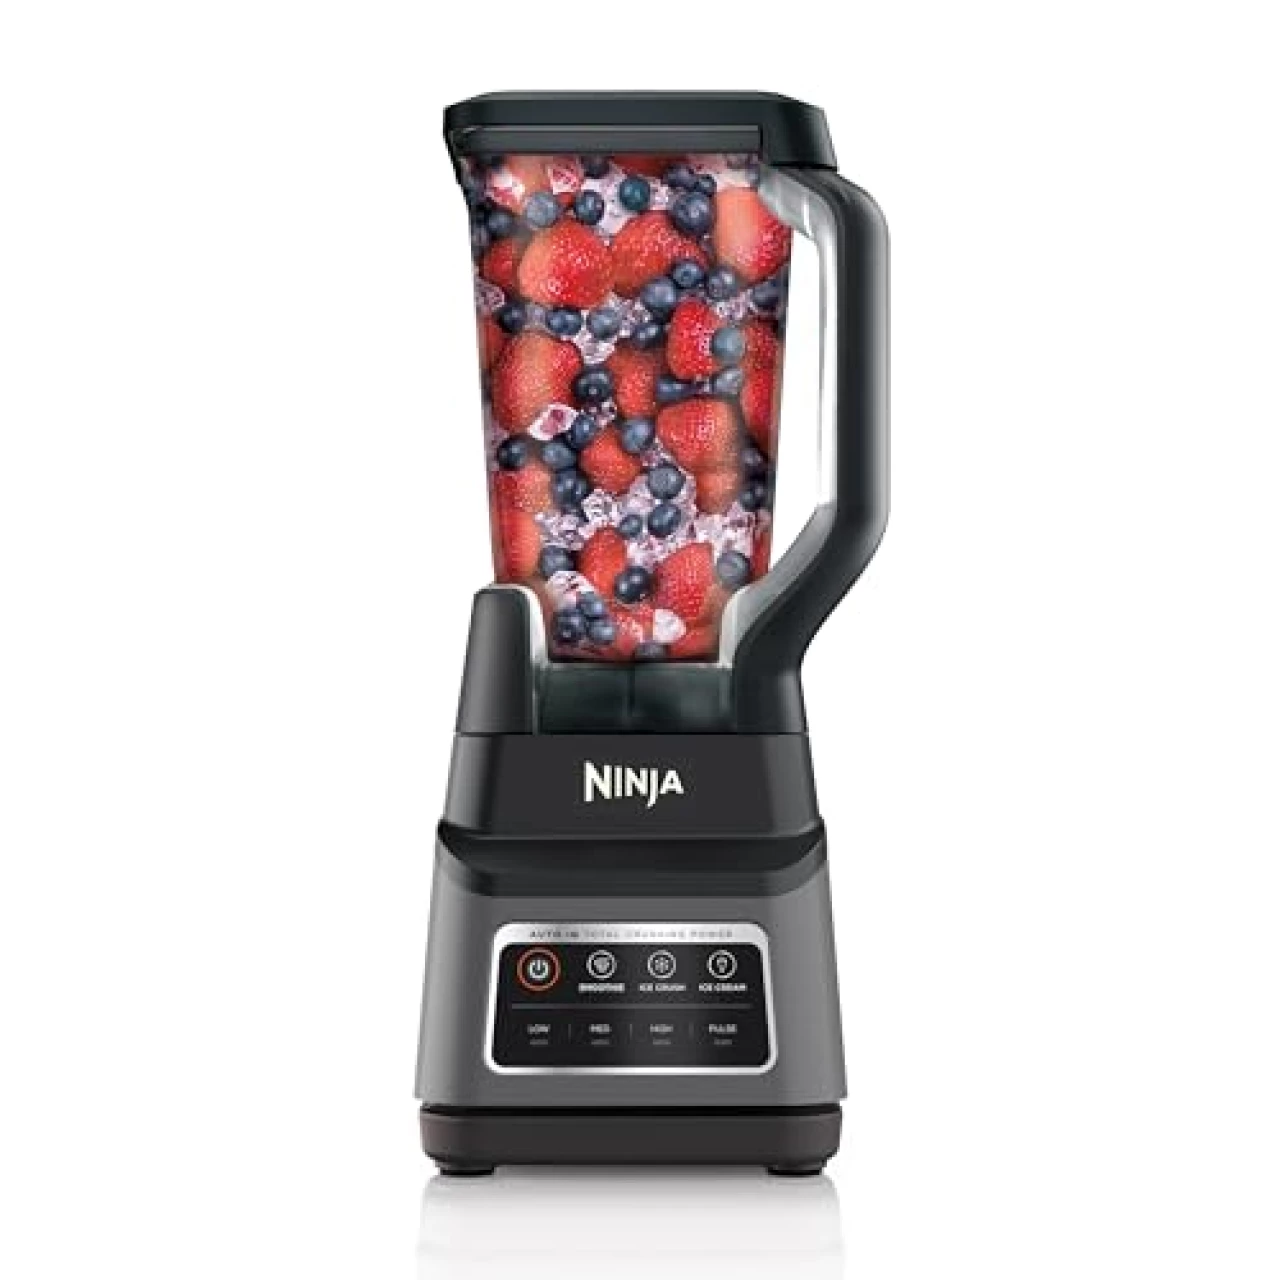 Ninja BN701 Professional Plus Blender, 1400 Peak Watts, 3 Functions for Smoothies, Frozen Drinks &amp; Ice Cream with Auto IQ, 72-oz.* Total Crushing Pitcher &amp; Lid, Dark Grey